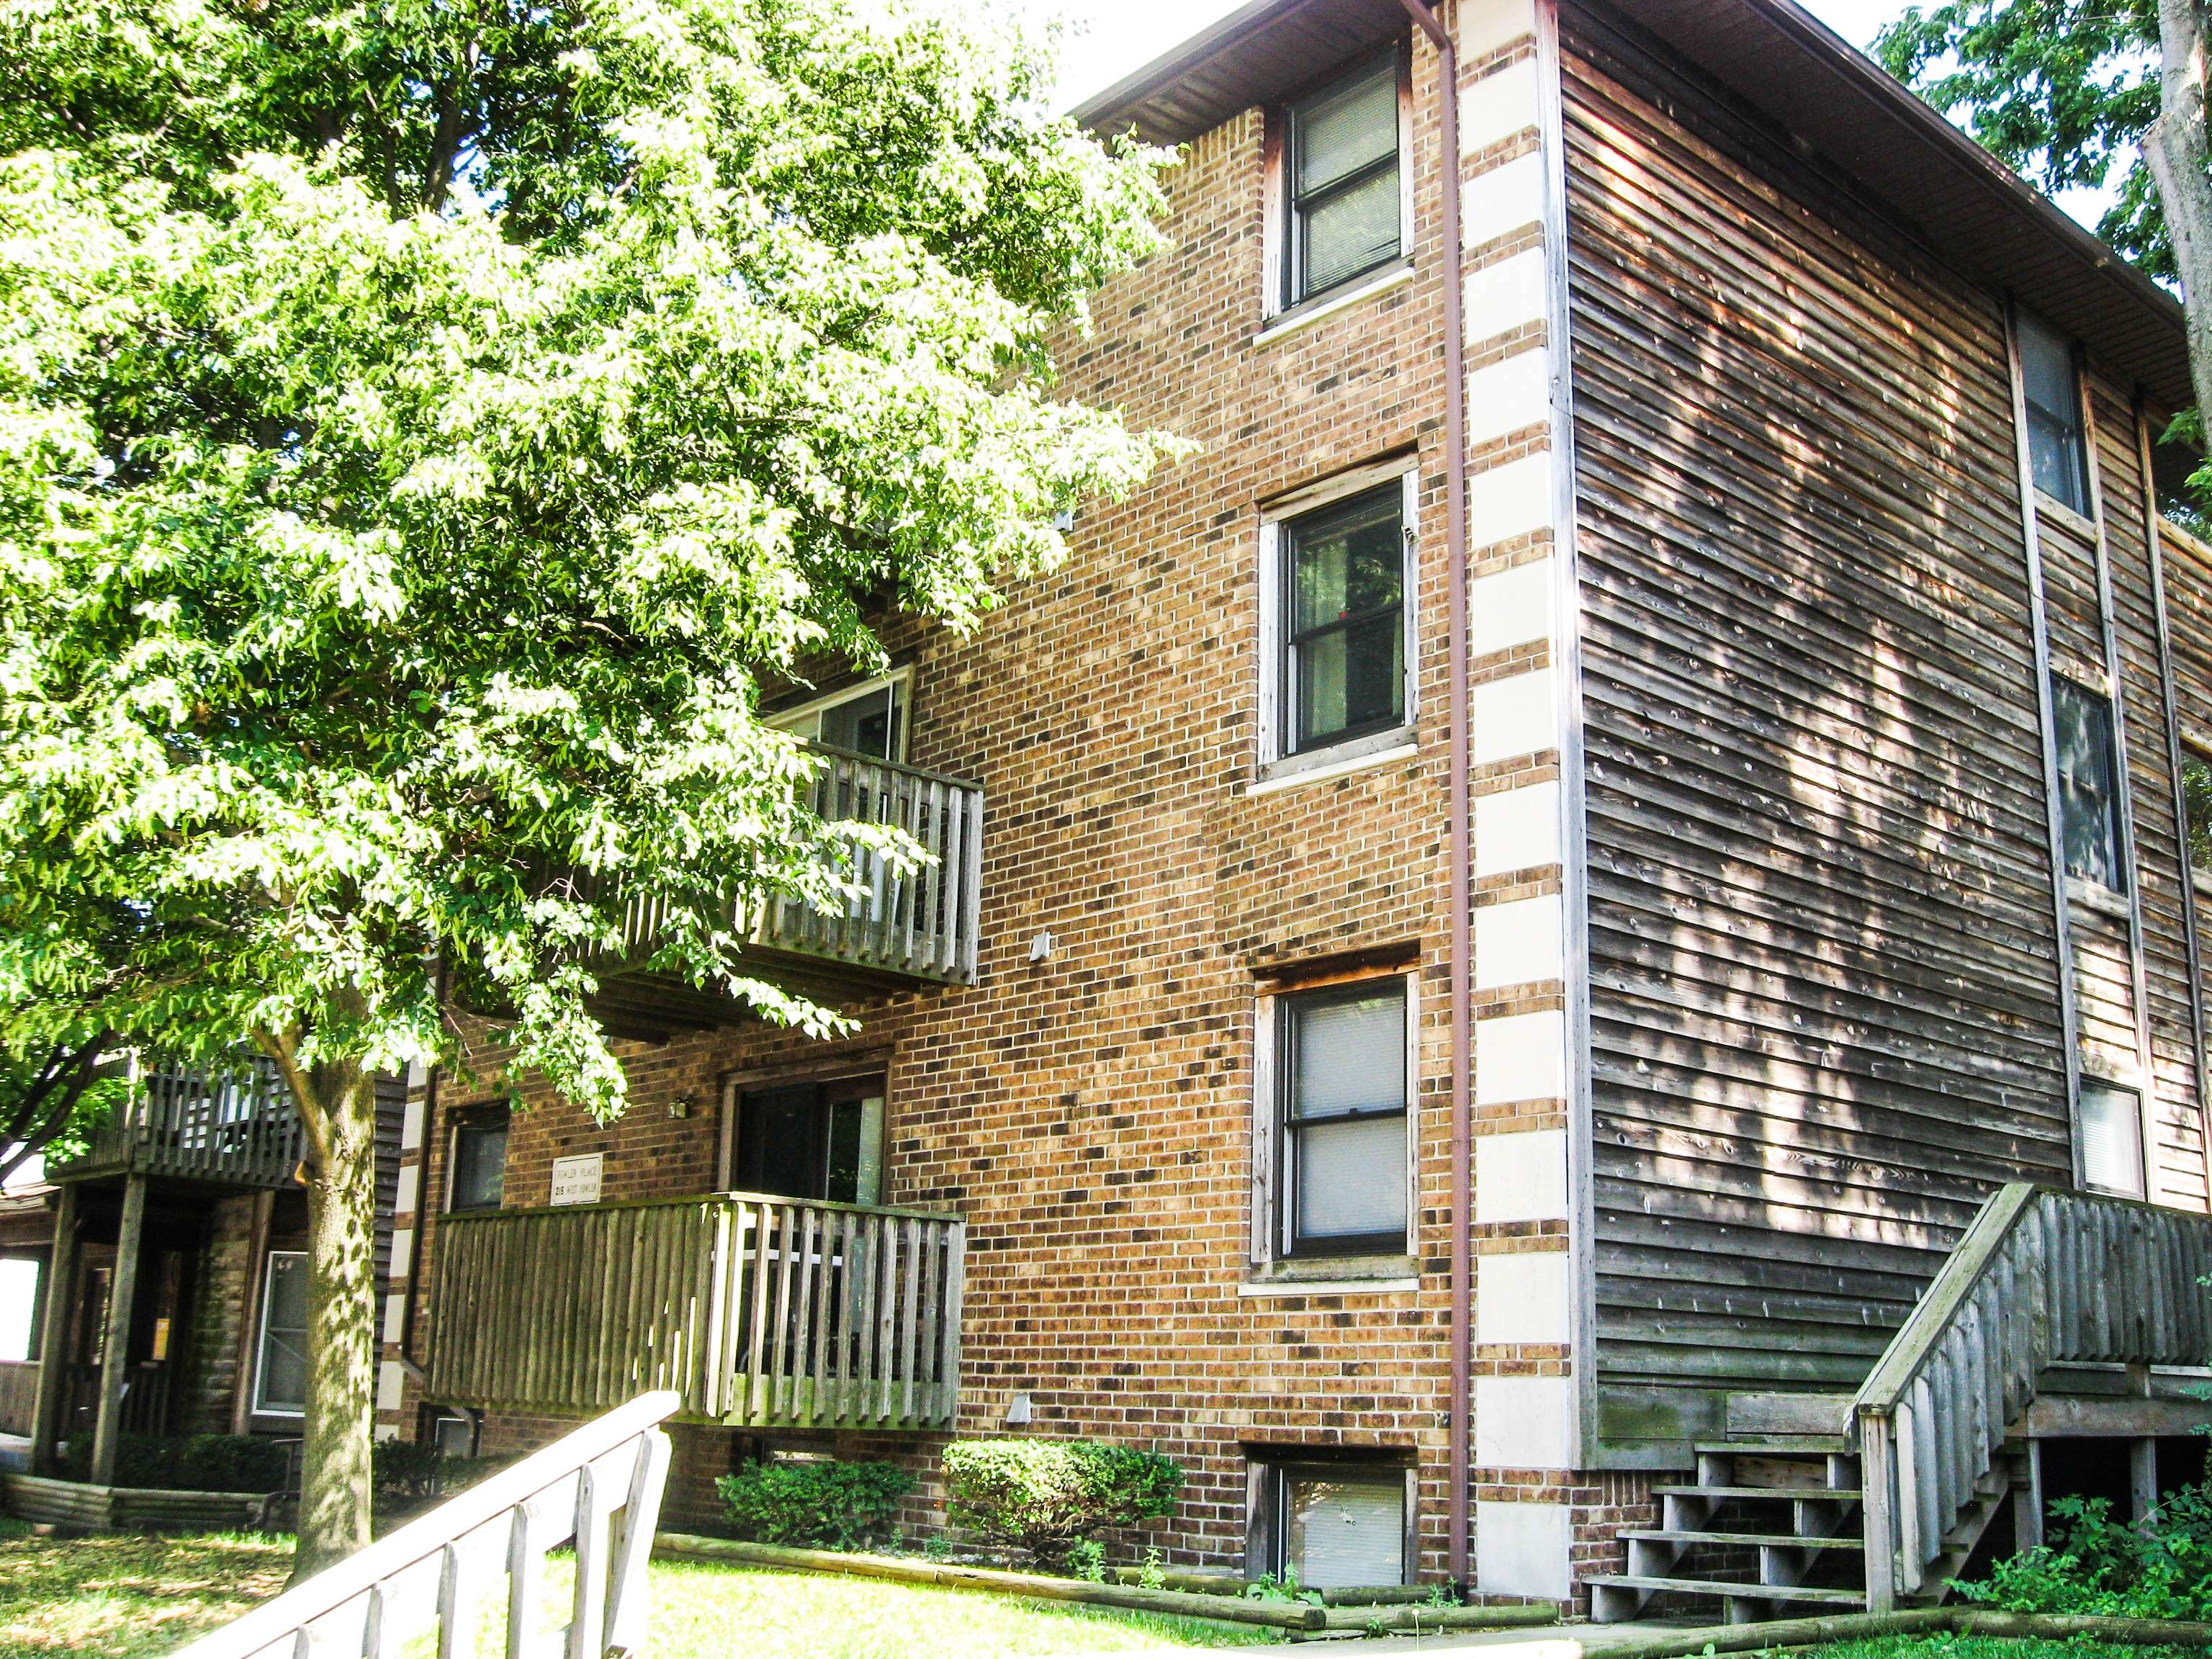 find-apartments/Howler/215-Fowler-Ave.-West-Lafayette/1542